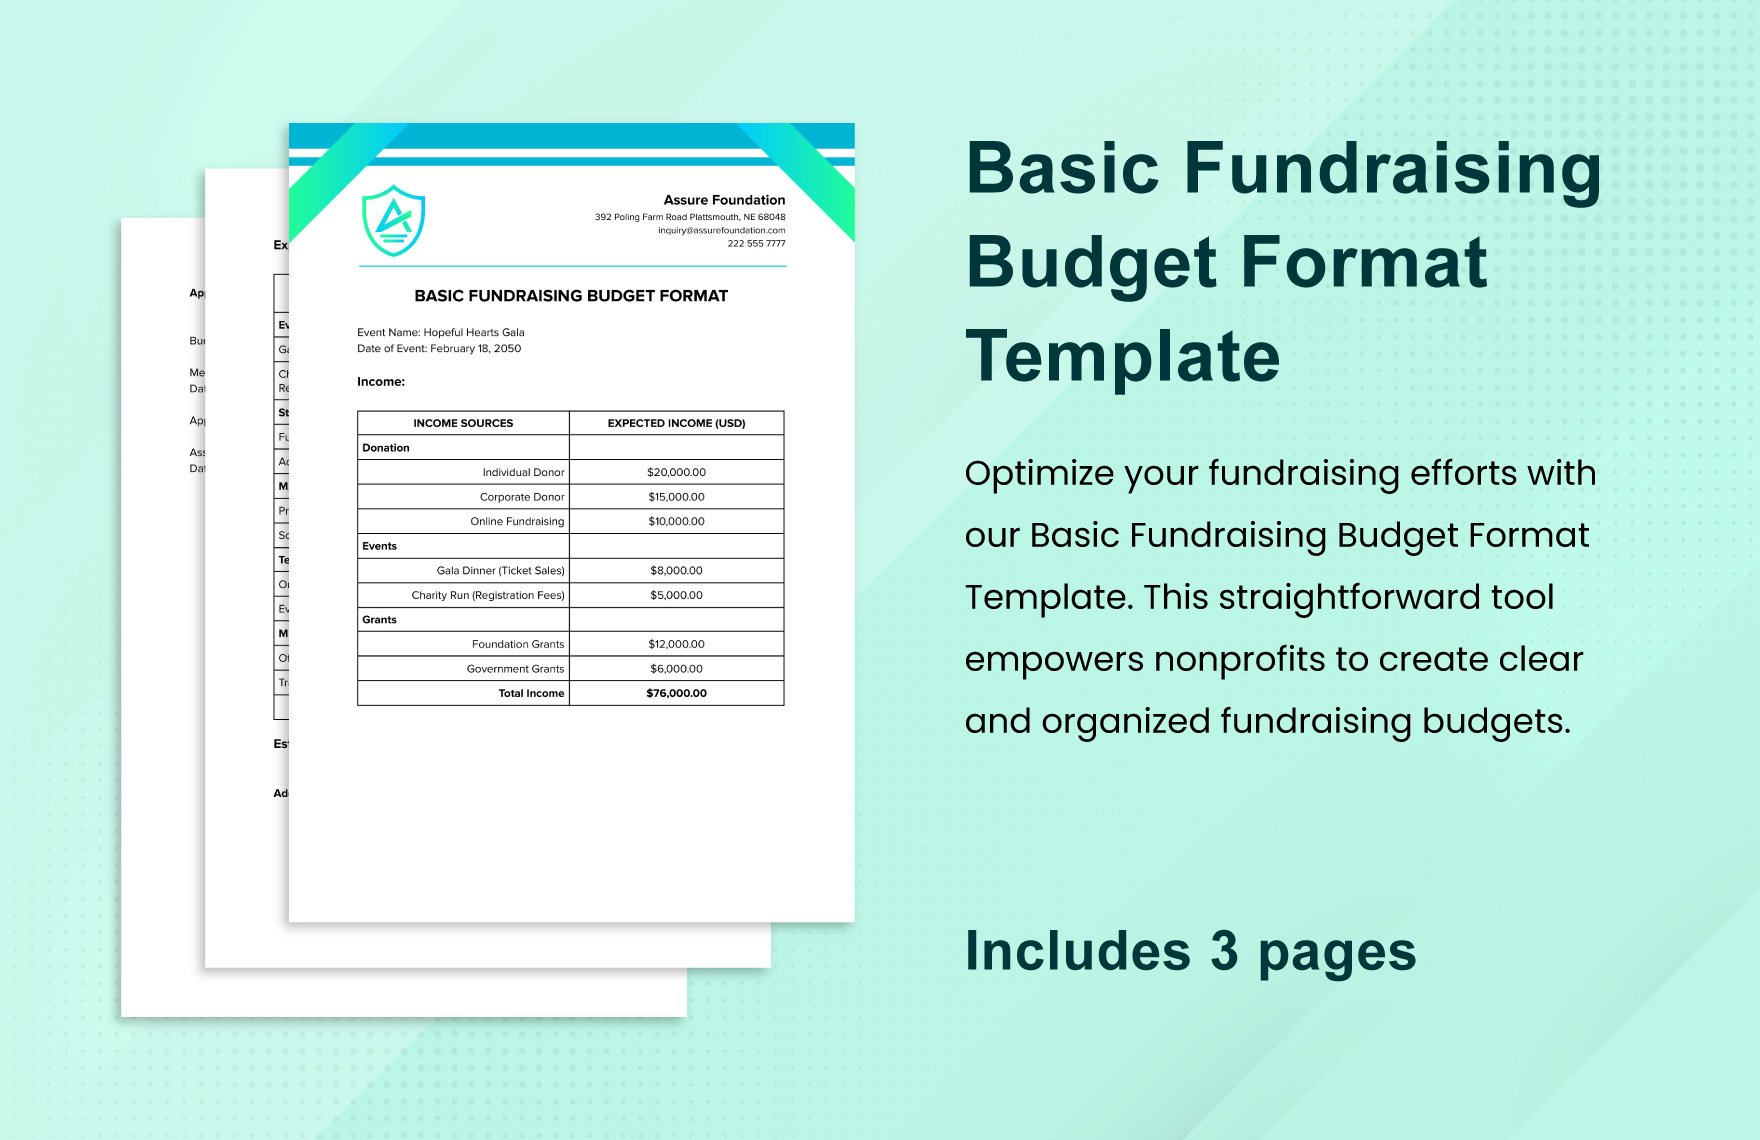 Basic Fundraising Budget Format Template